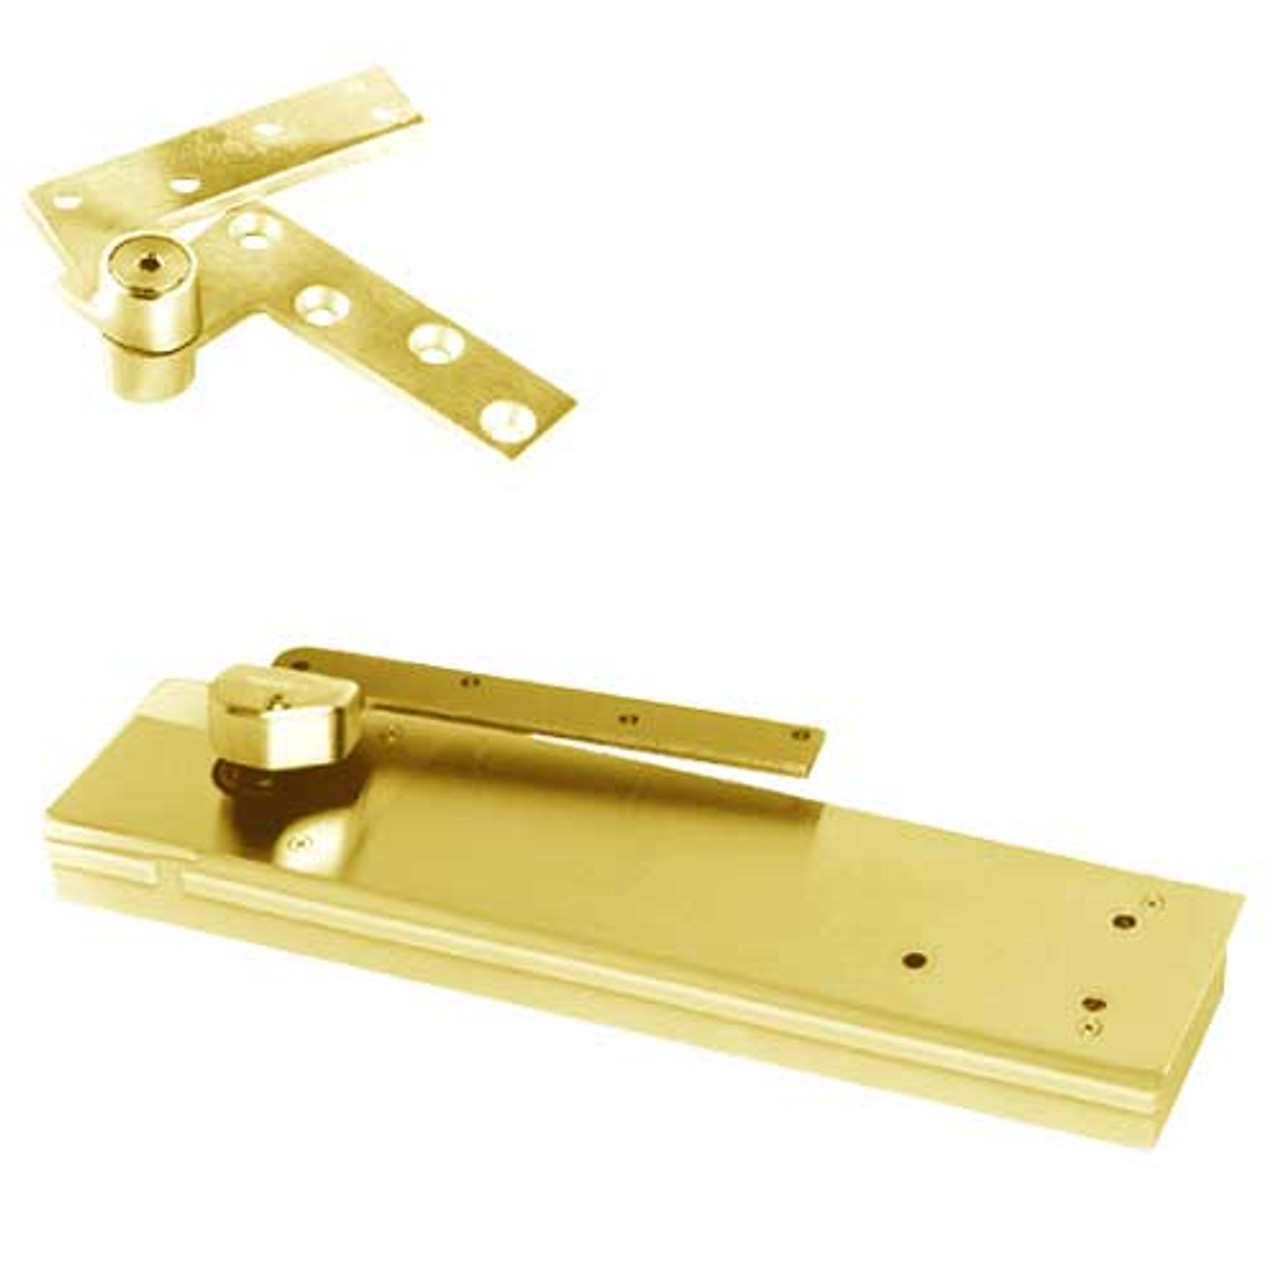 5103ABC105-1-1/2OS-SC-RH-605 Rixson 51 Series 1-1/2" Offset Hung Shallow Depth Floor Closers in Bright Brass Finish